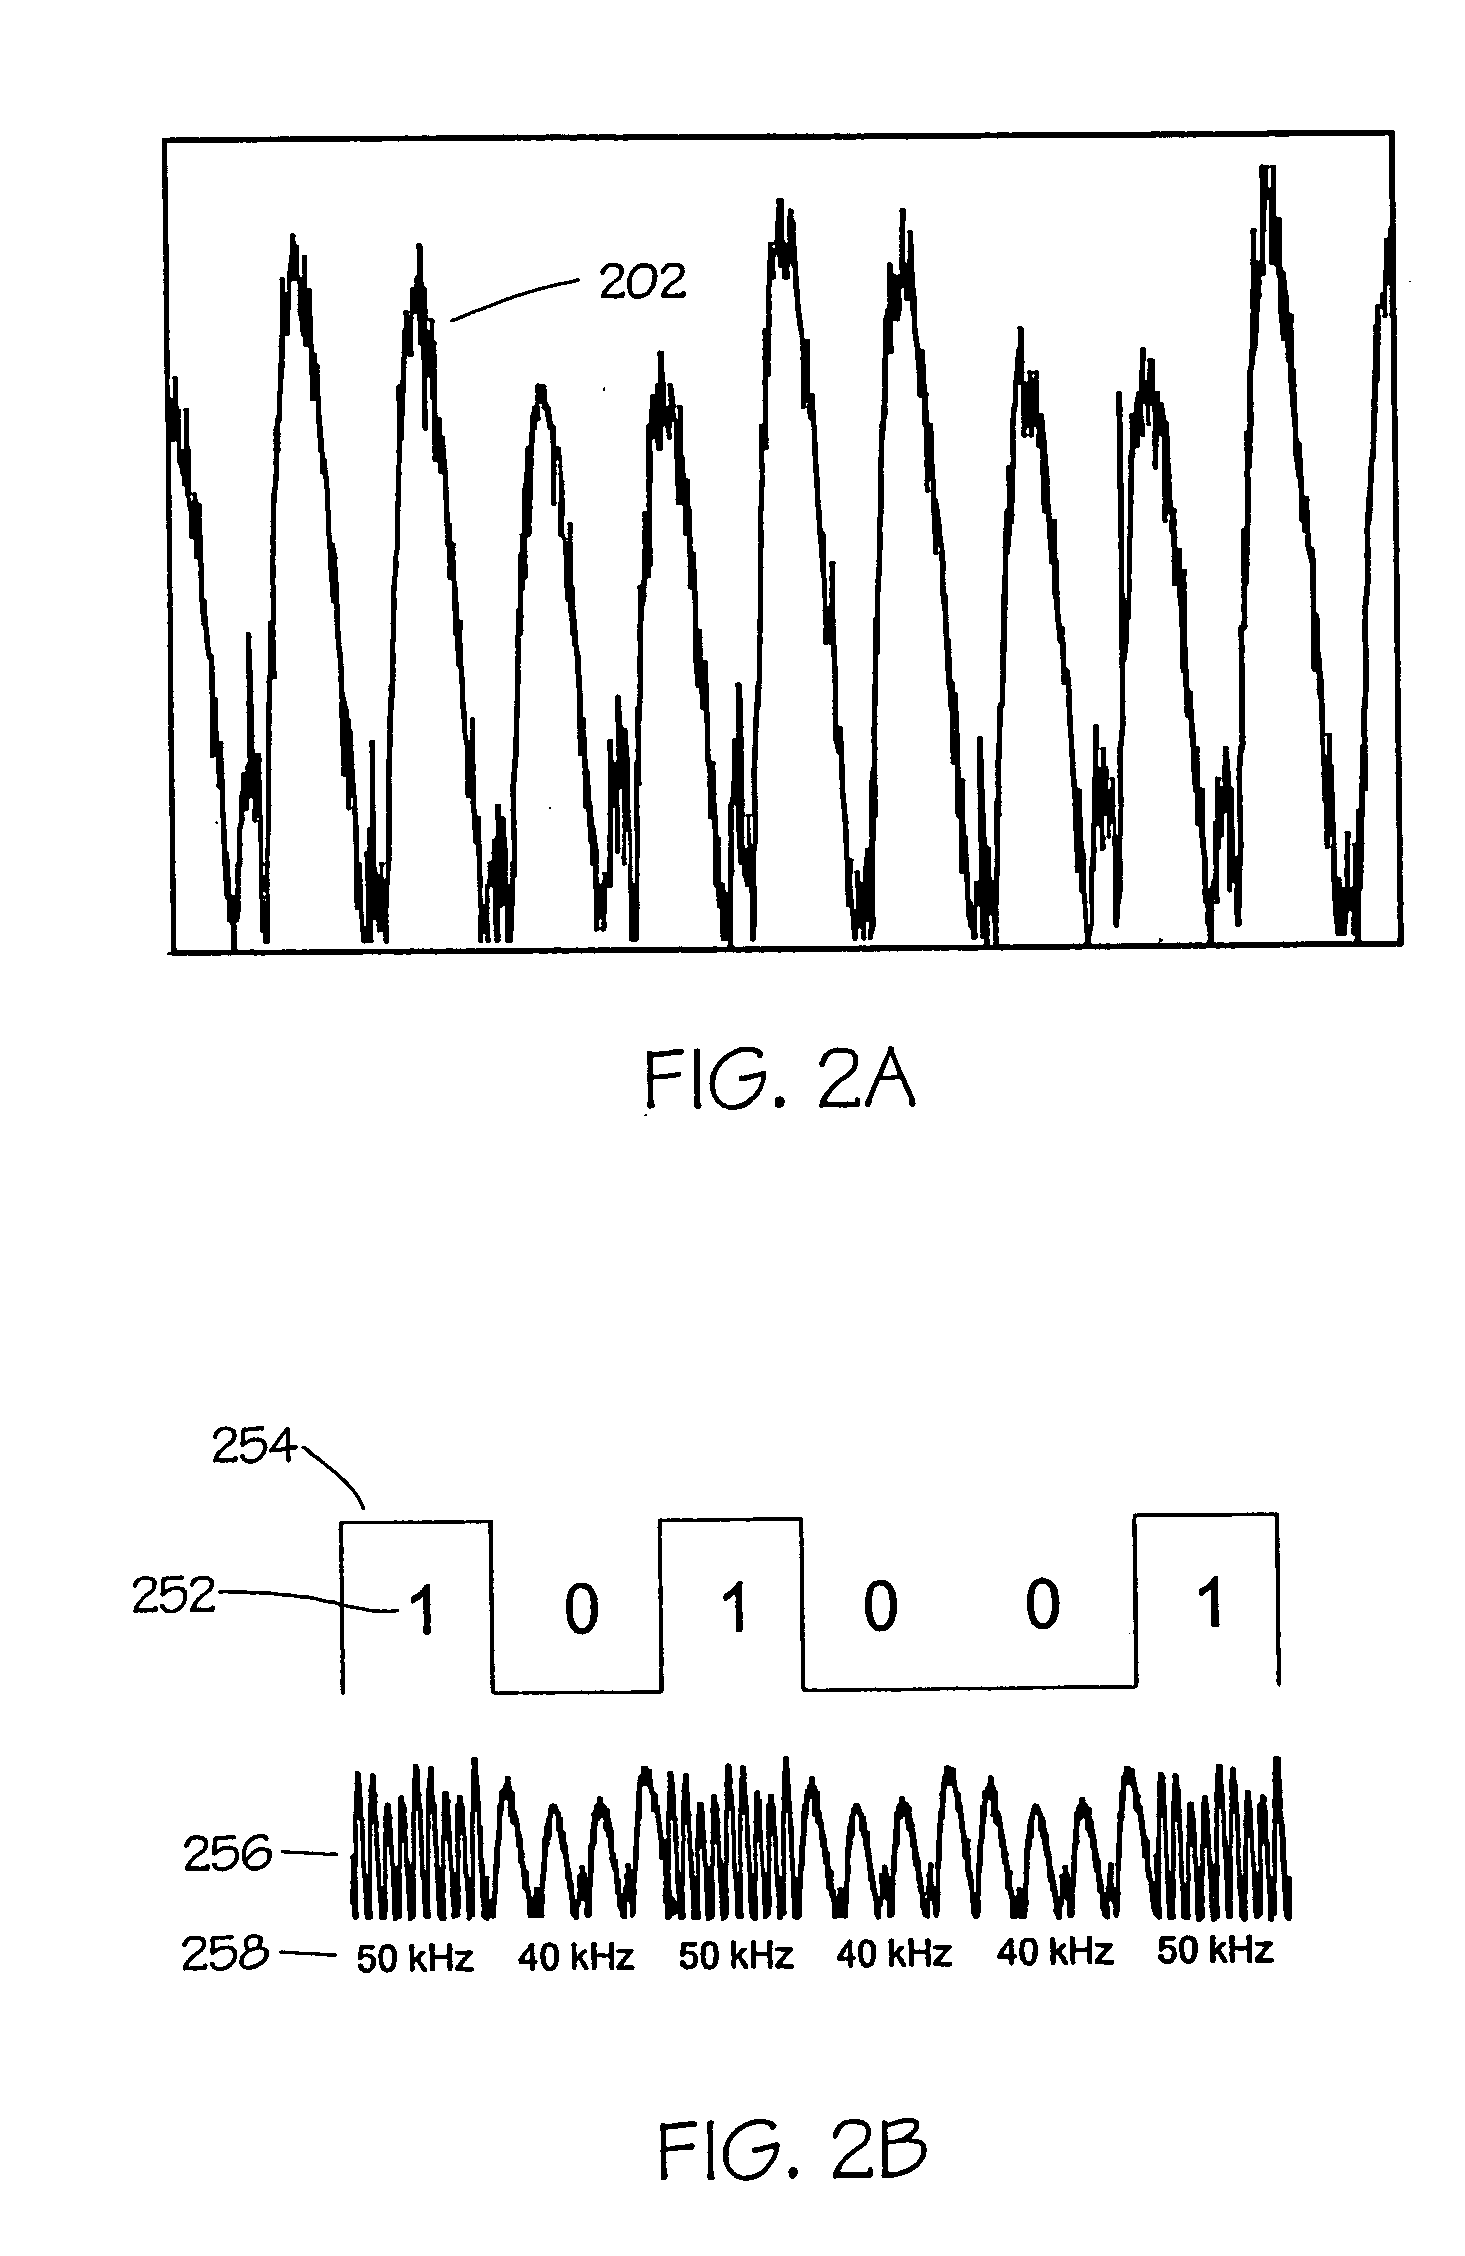 Method and apparatus for the zonal transmission of data using building lighting fixtures